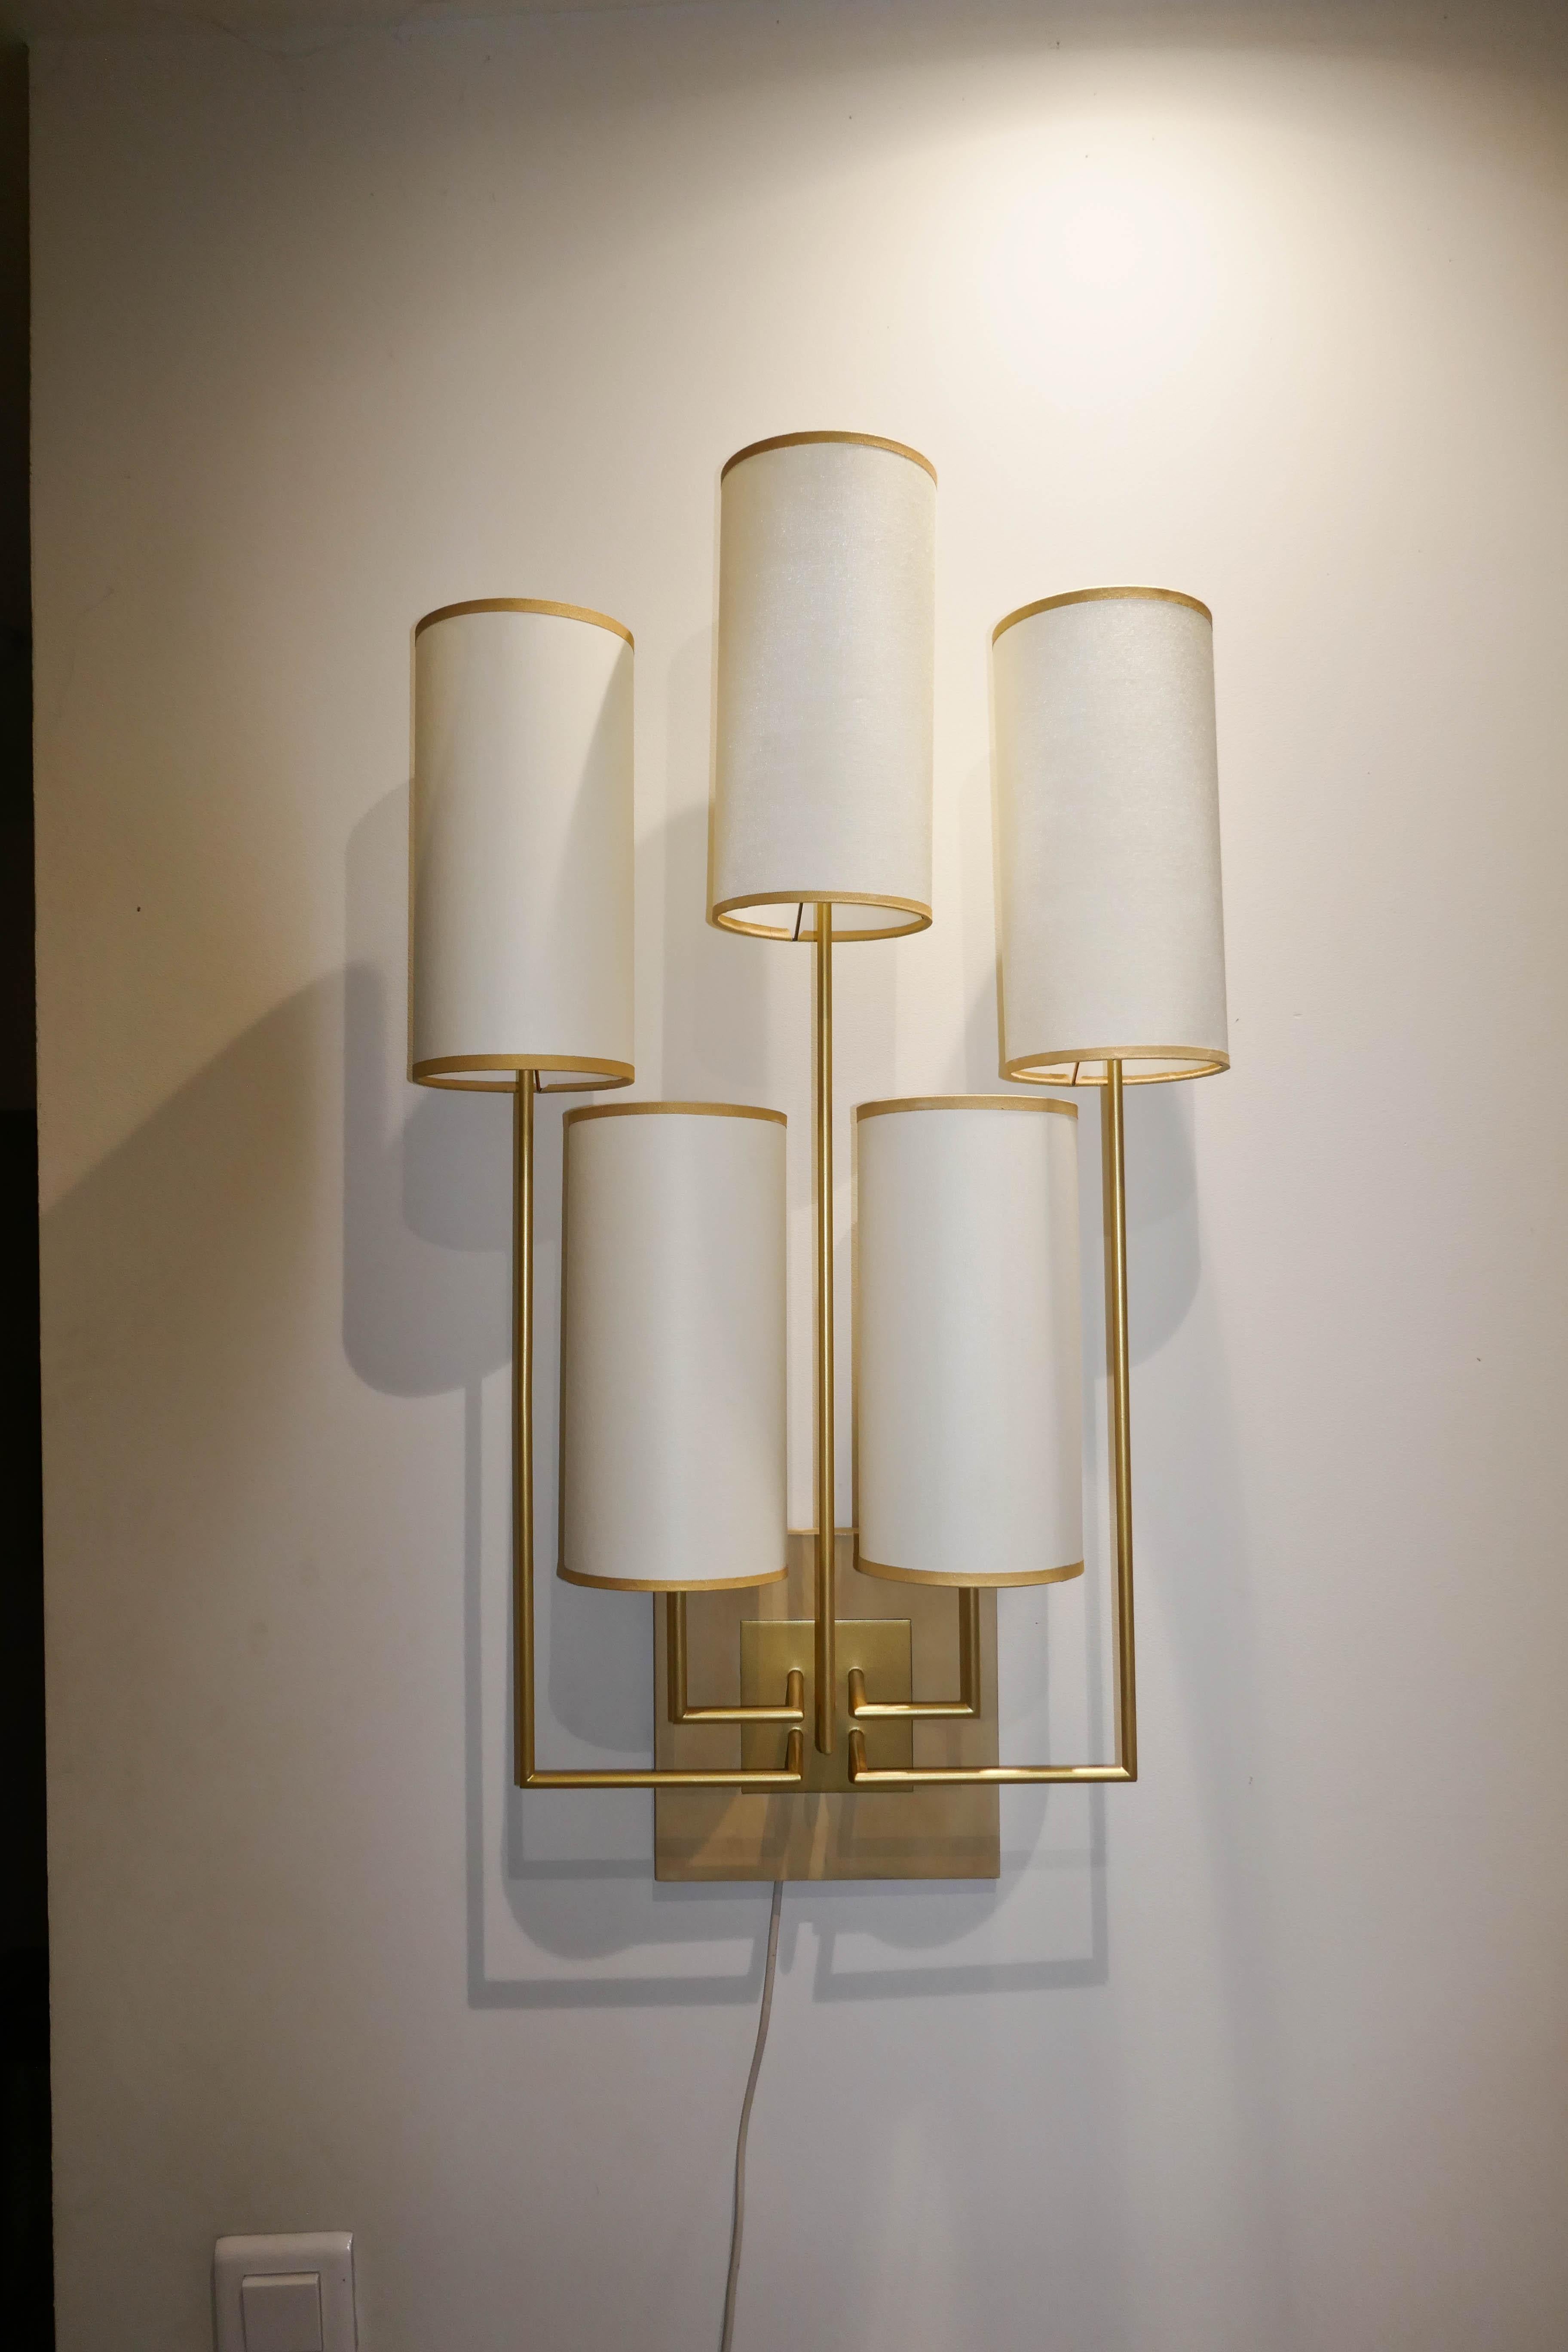 Wall light, sconce in gold patina metal, the base is in chestnut wood. There are five lampshades in white fabric.
This wall lamp is new but has been used for an exhibition.
This is for one item but can be sold as a pair.